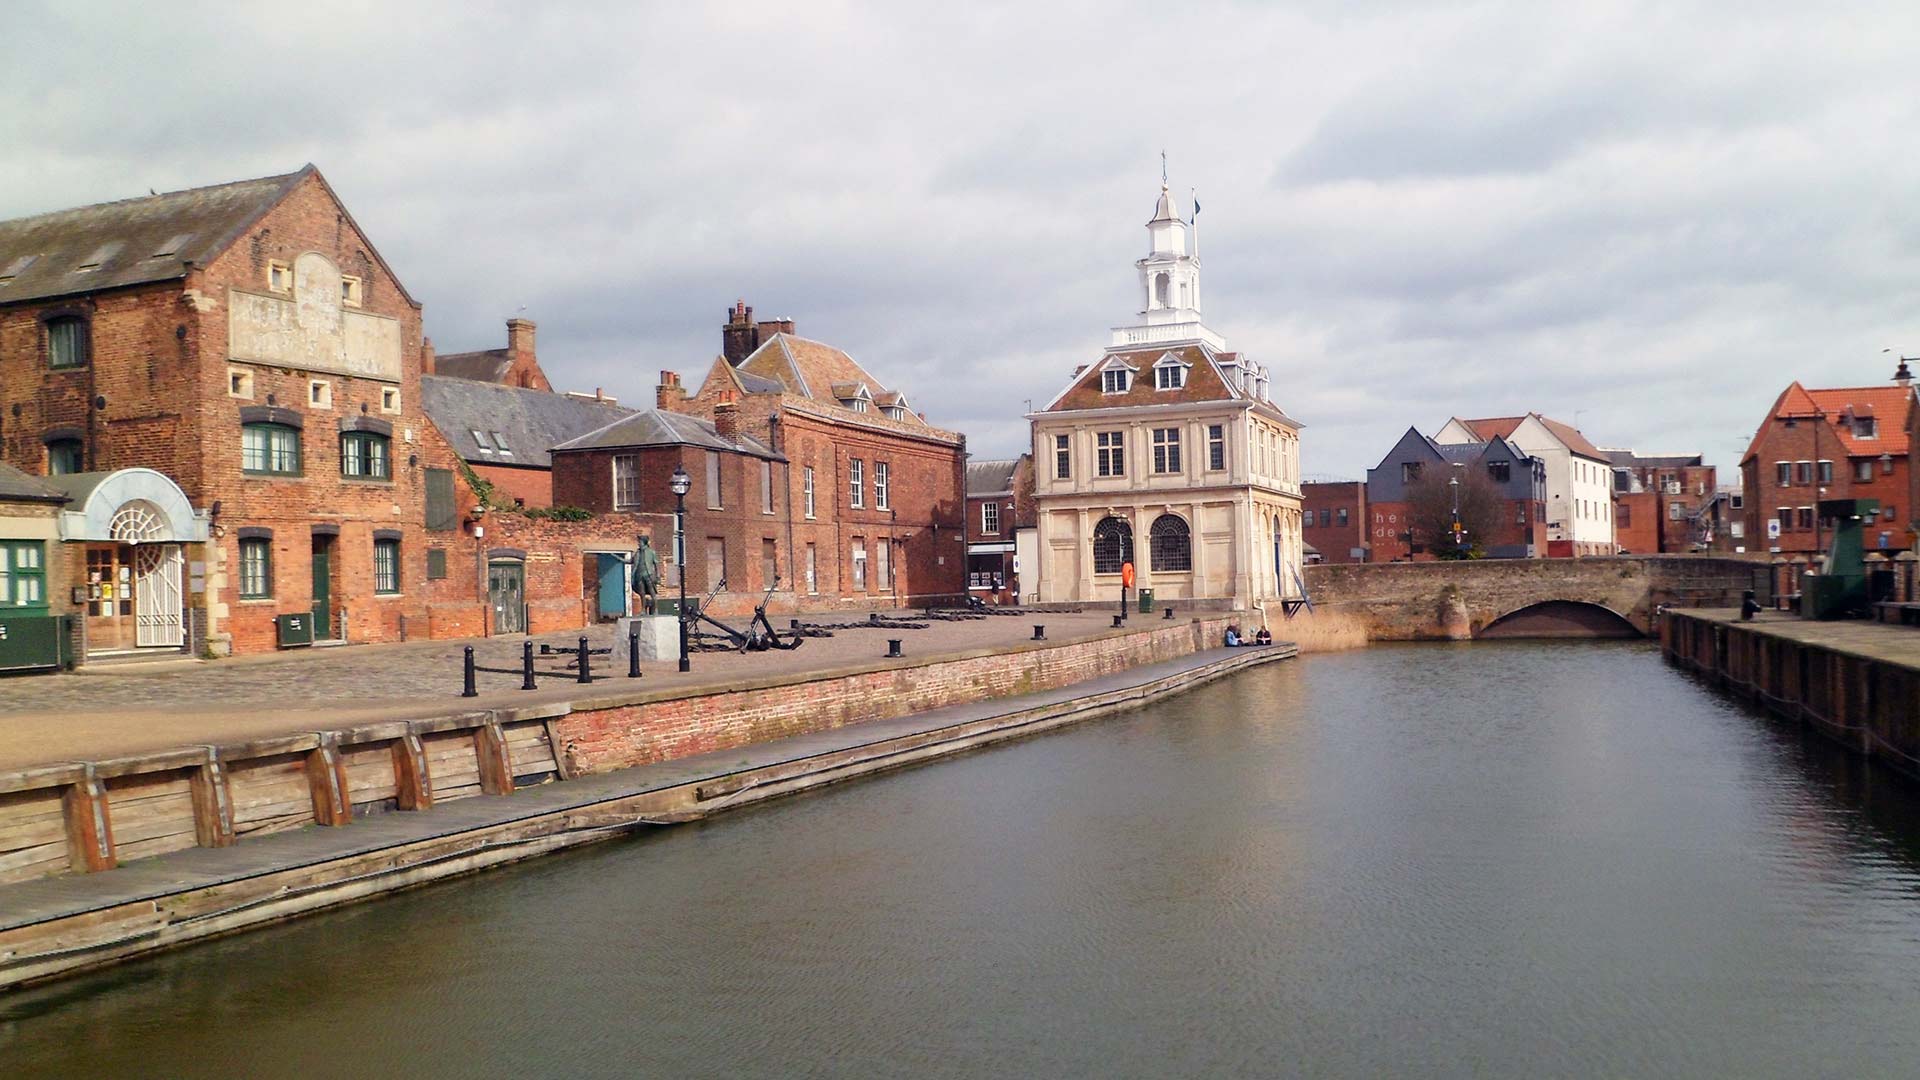 Panorama to illustrate dating in kings lynn